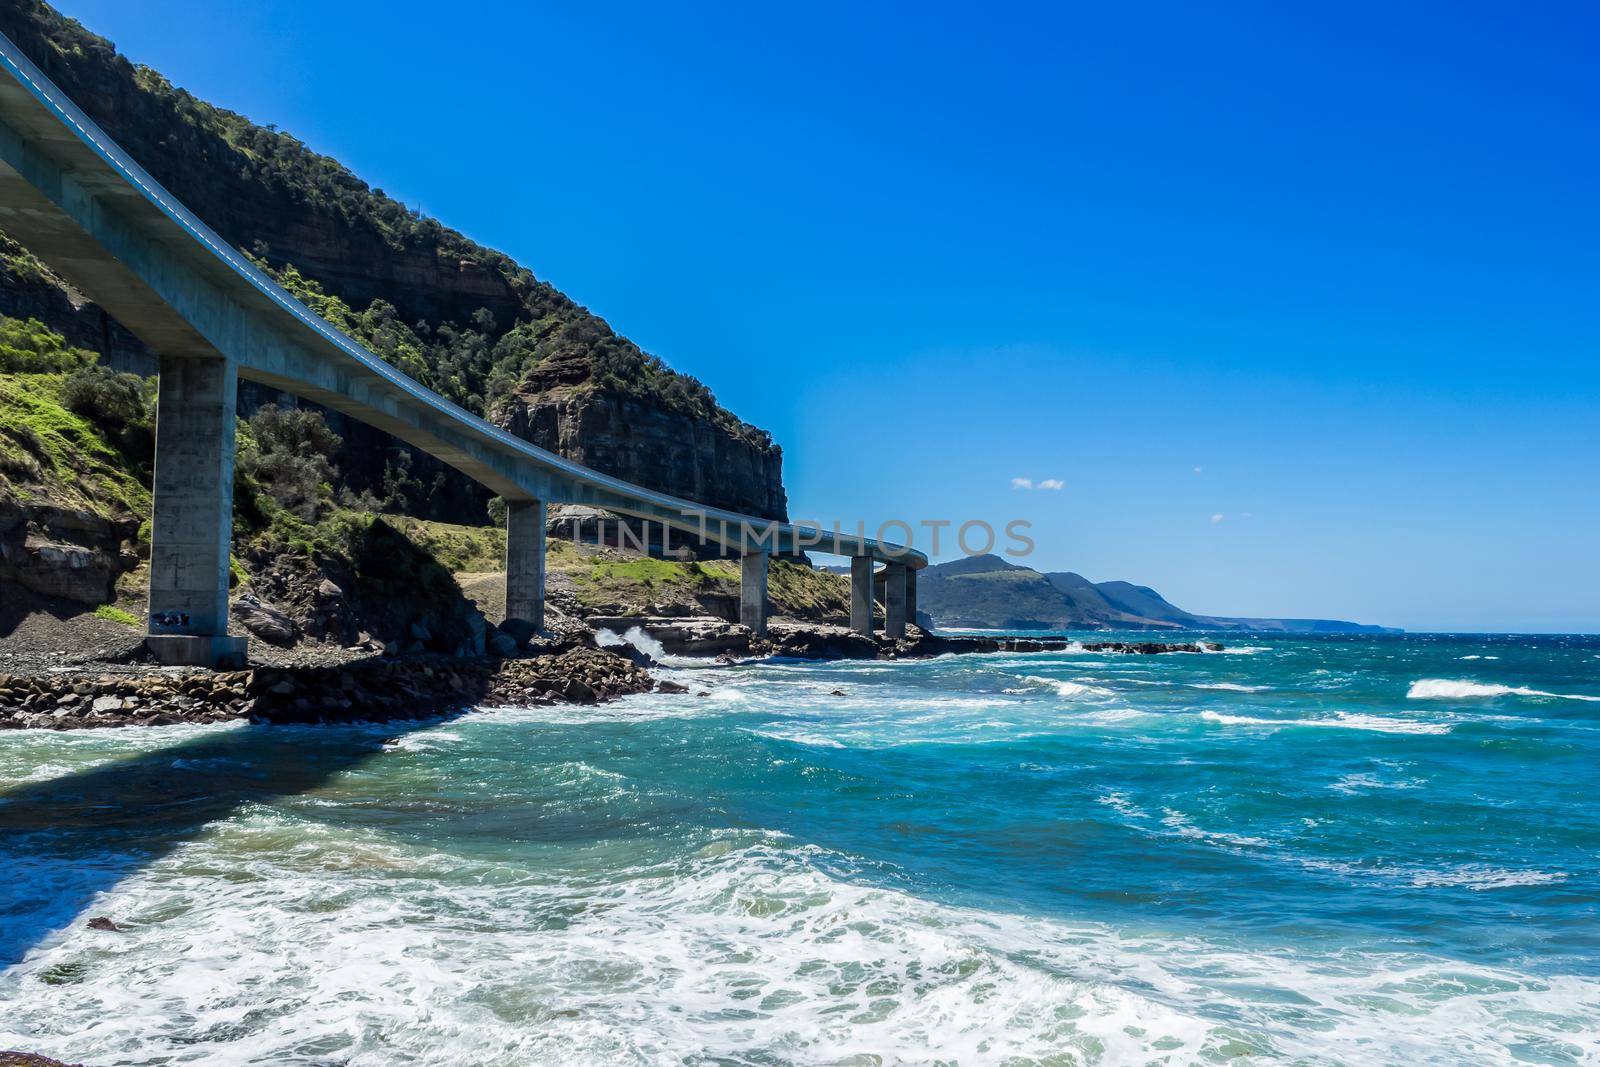 Sea Cliff Bridge along Grand Pacific Drive, New South Wales, Australia by bettercallcurry